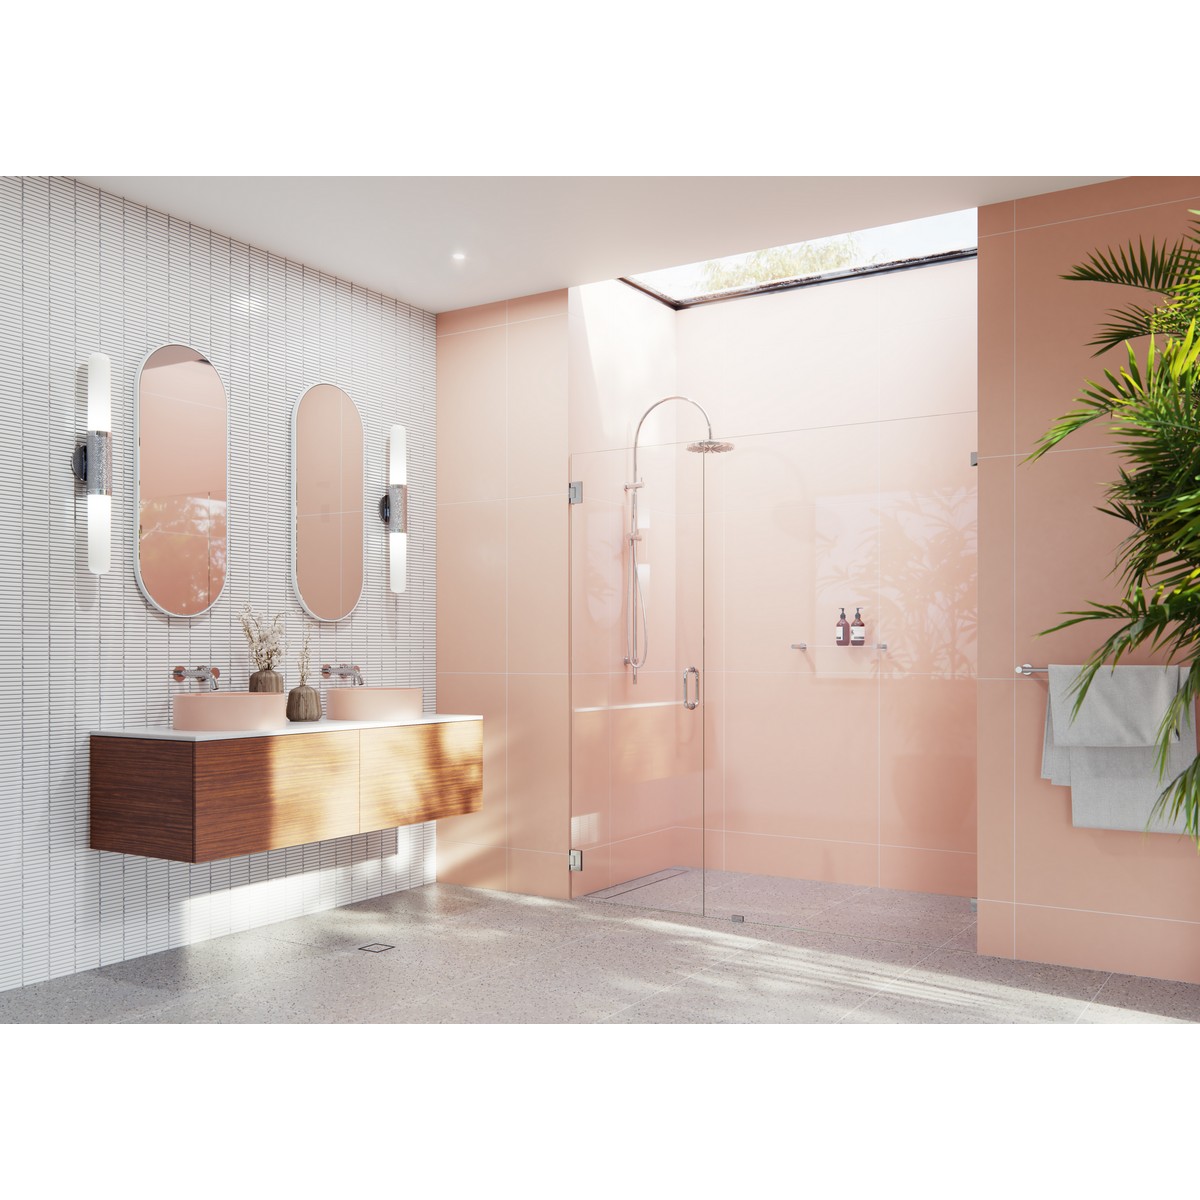 GLASS WAREHOUSE GW-WH-74.75 ILLUME 74 3/4 W X 78 H WALL HINGED FULLY FRAMELESS GLASS SHOWER ENCLOSURE